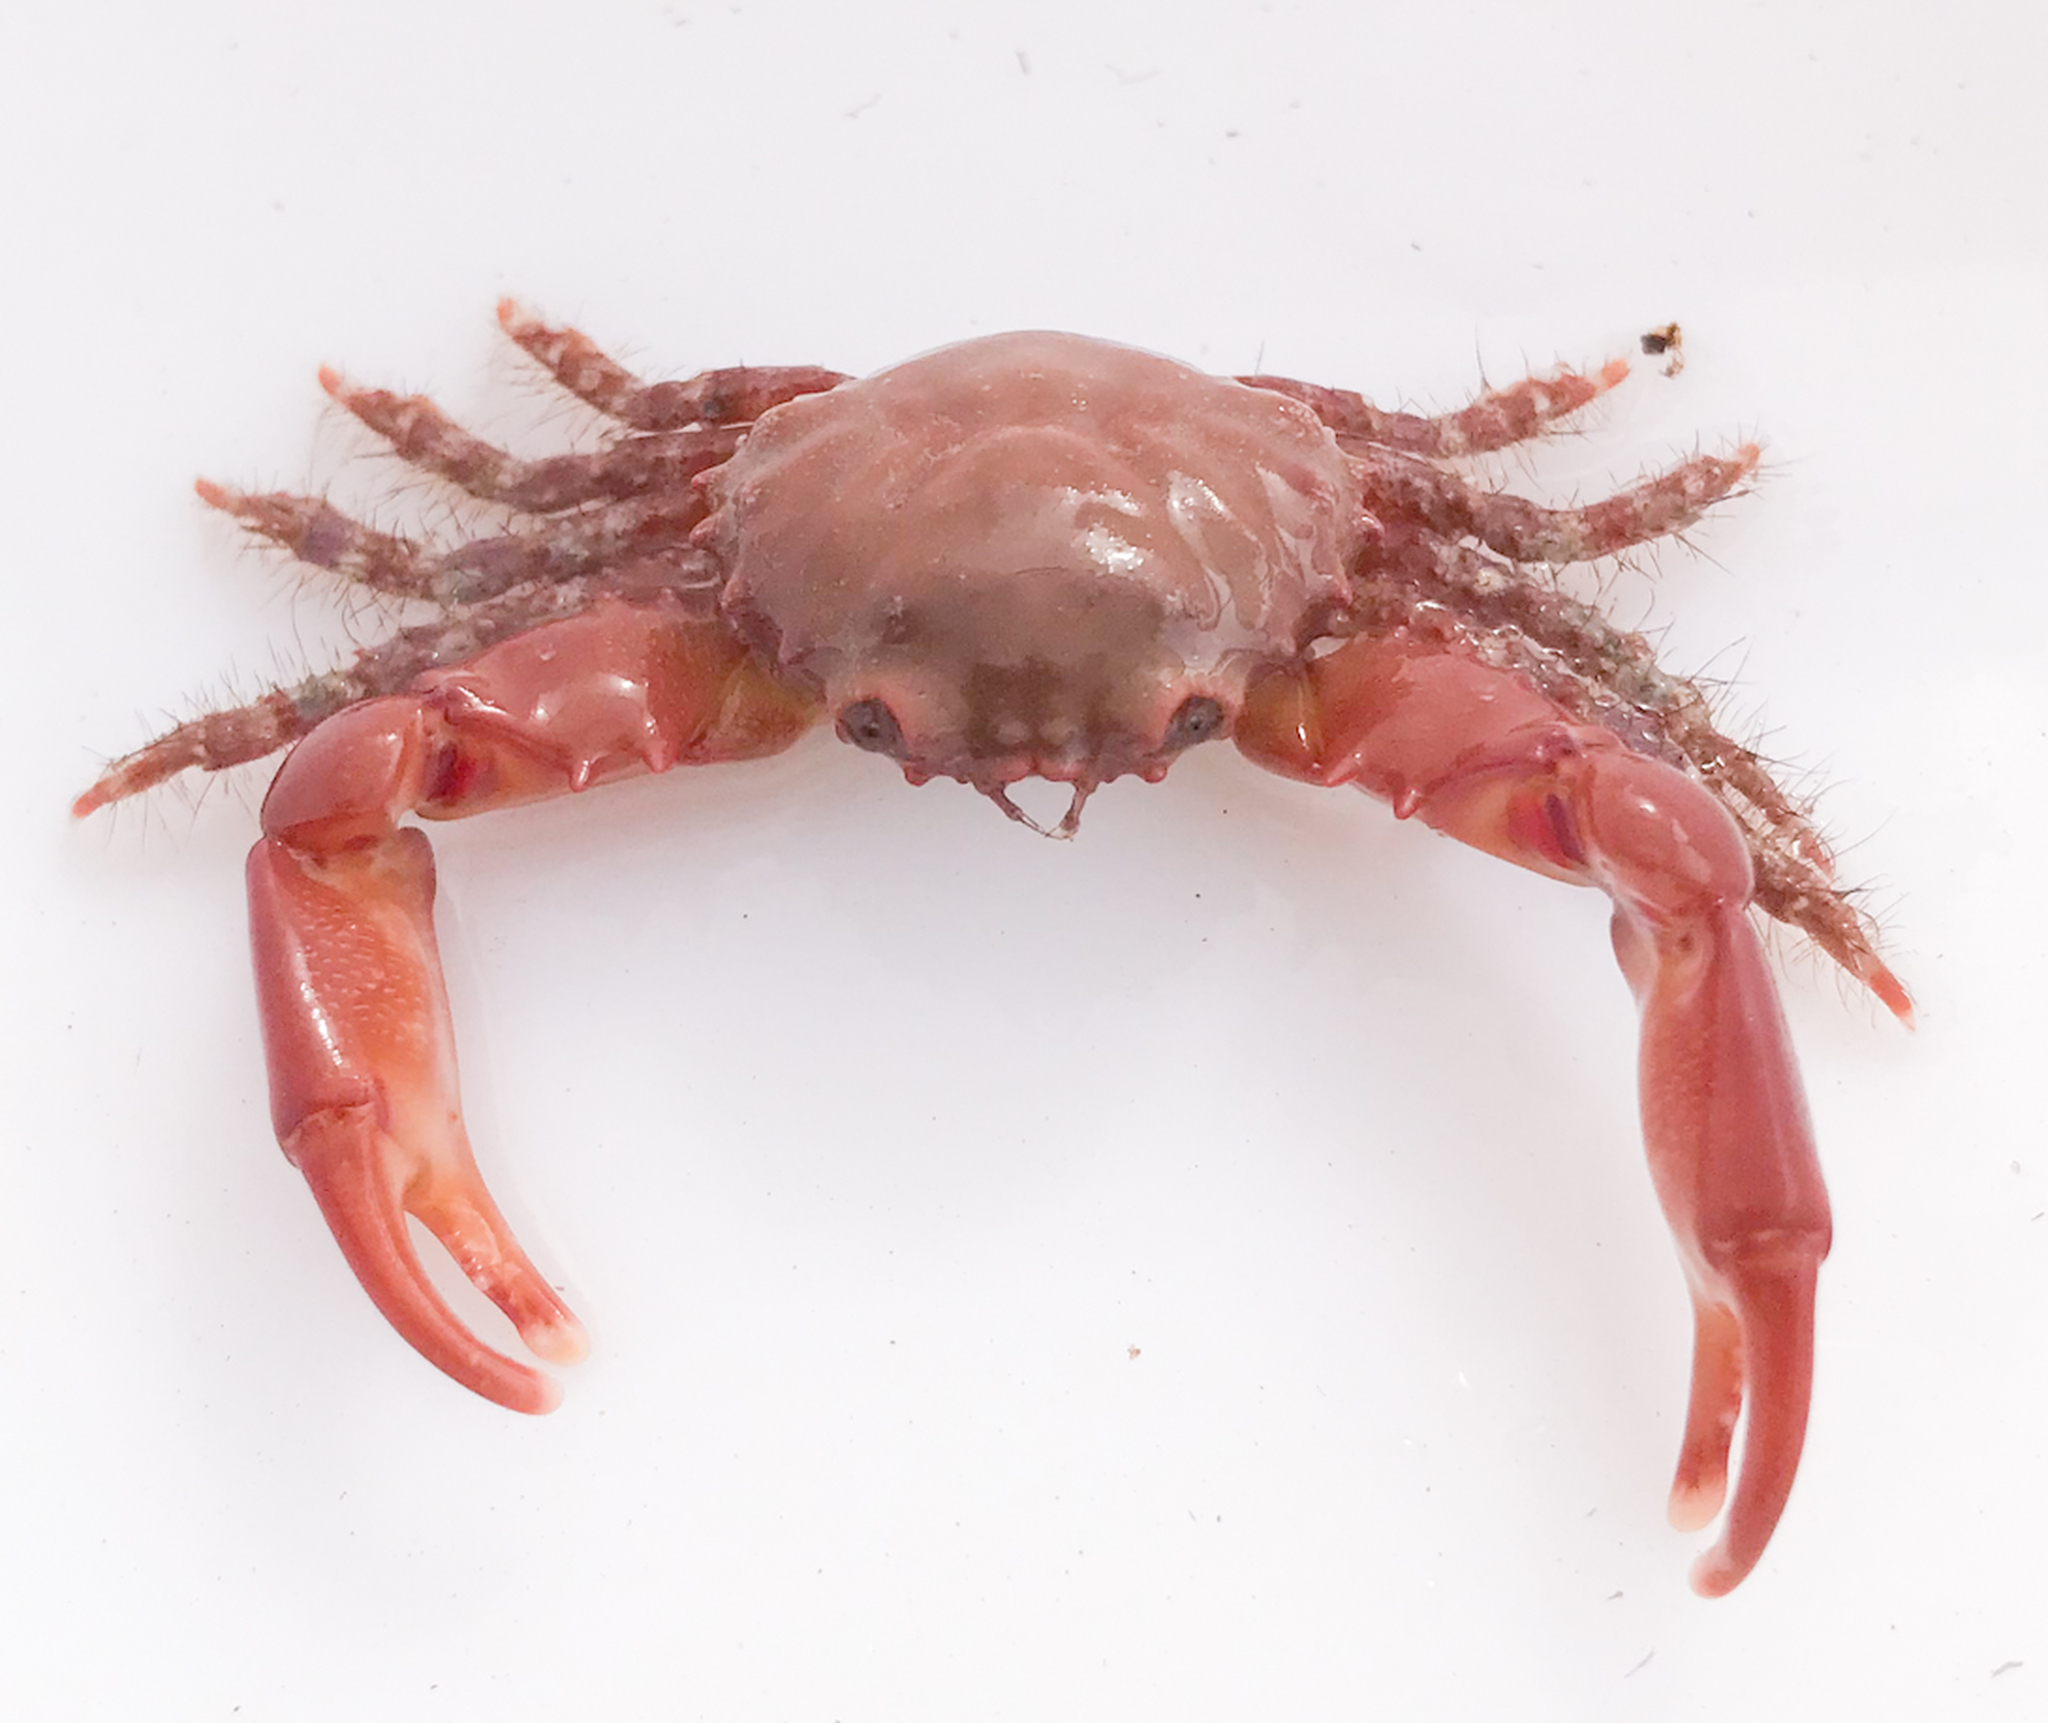 Ruby Red crabs for saltwater aquariums. Get Ruby Red Emerald crabs.